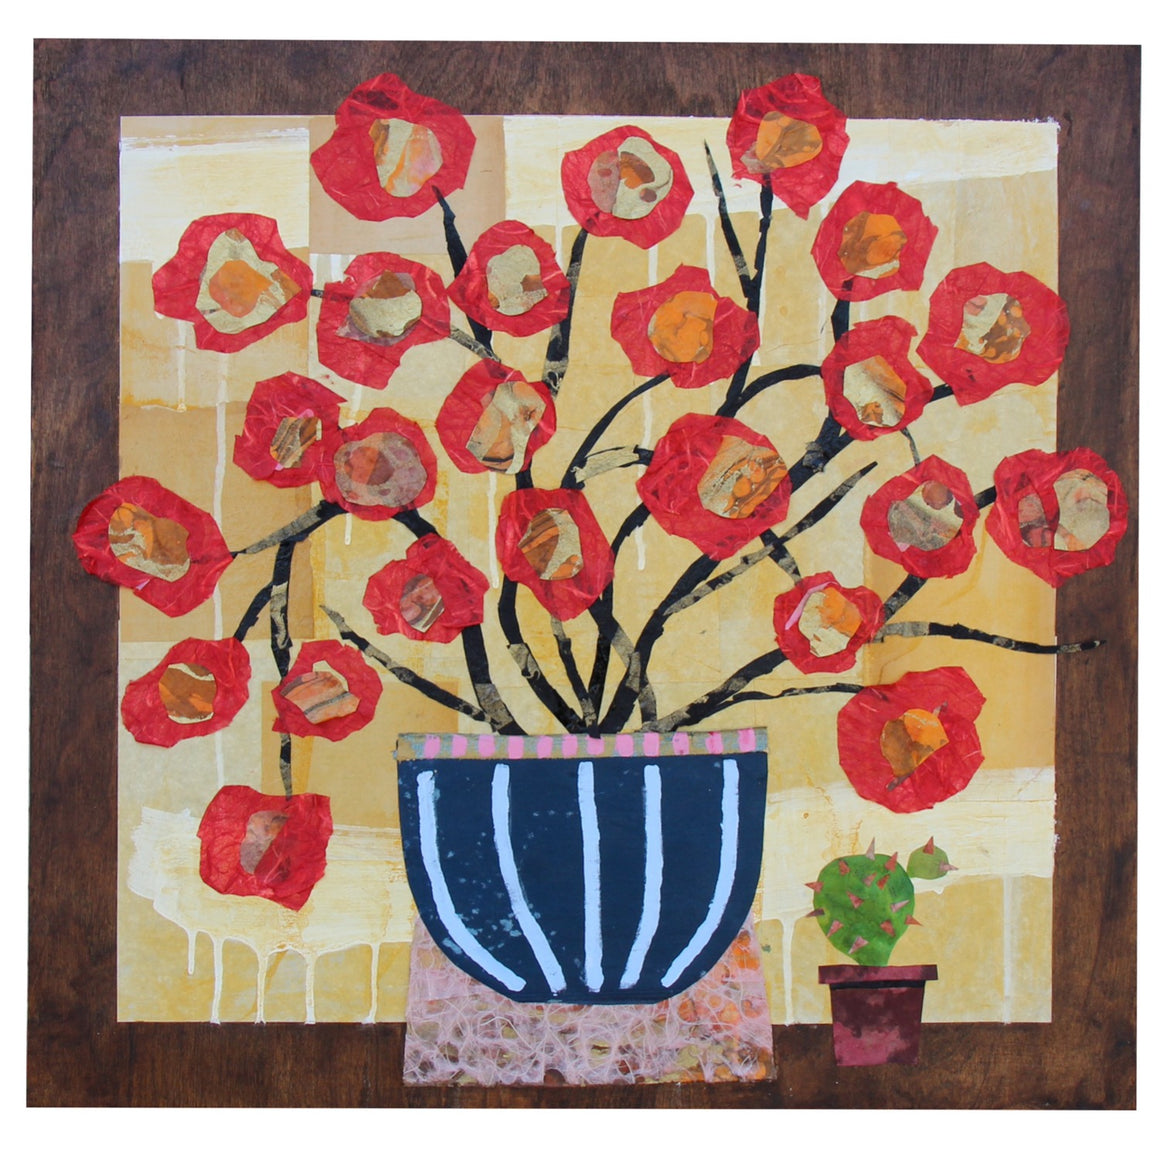 Red Flowers with Small Cactus - Larry Goode - 24x24"